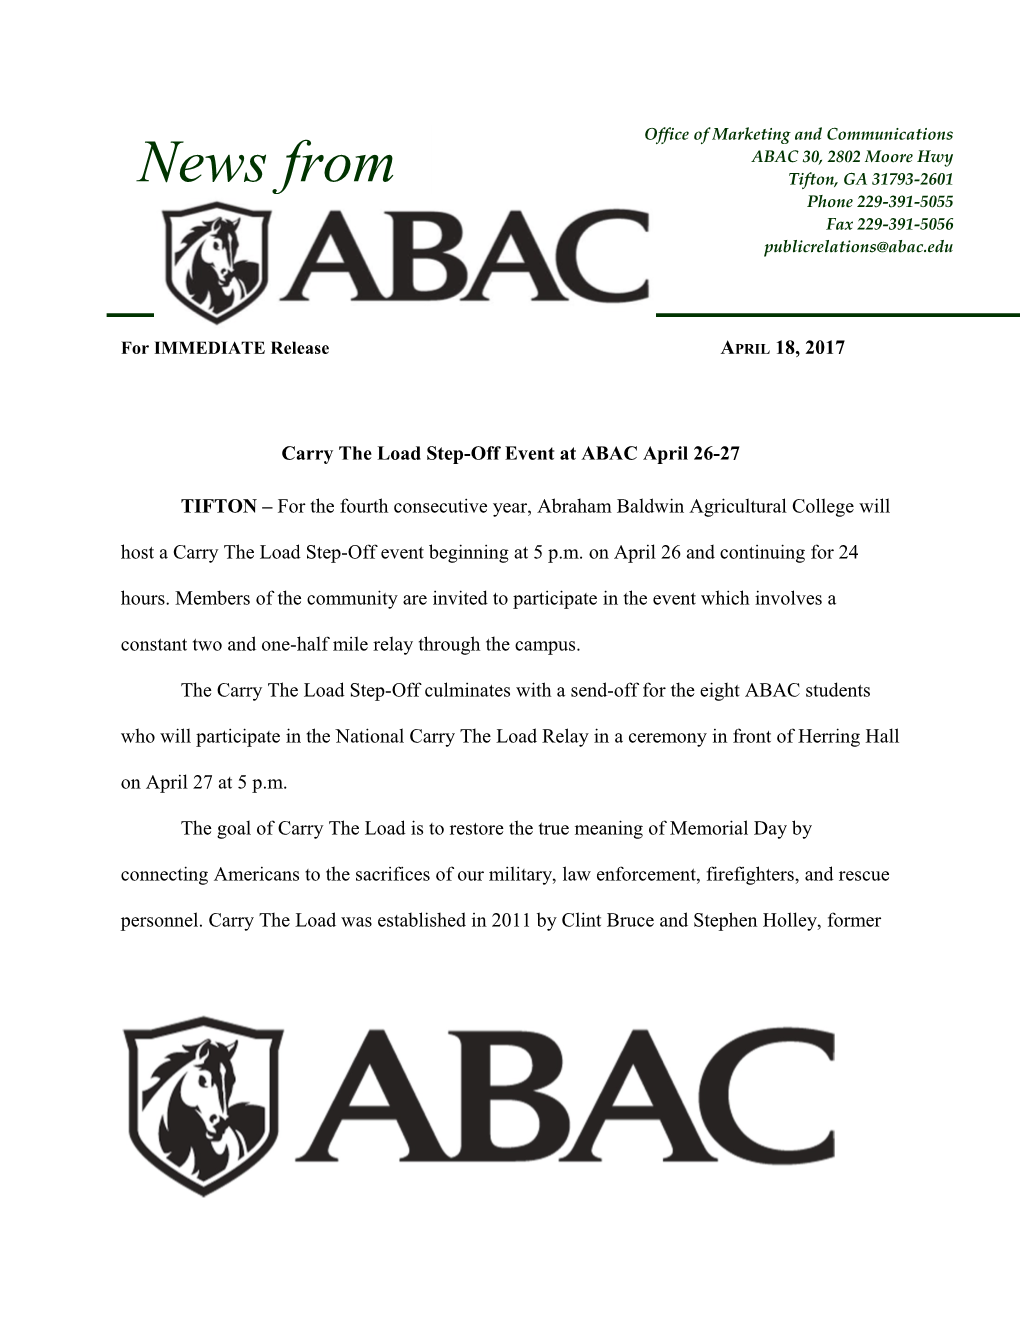 Carry the Load Step-Off Event at ABAC April 26-27